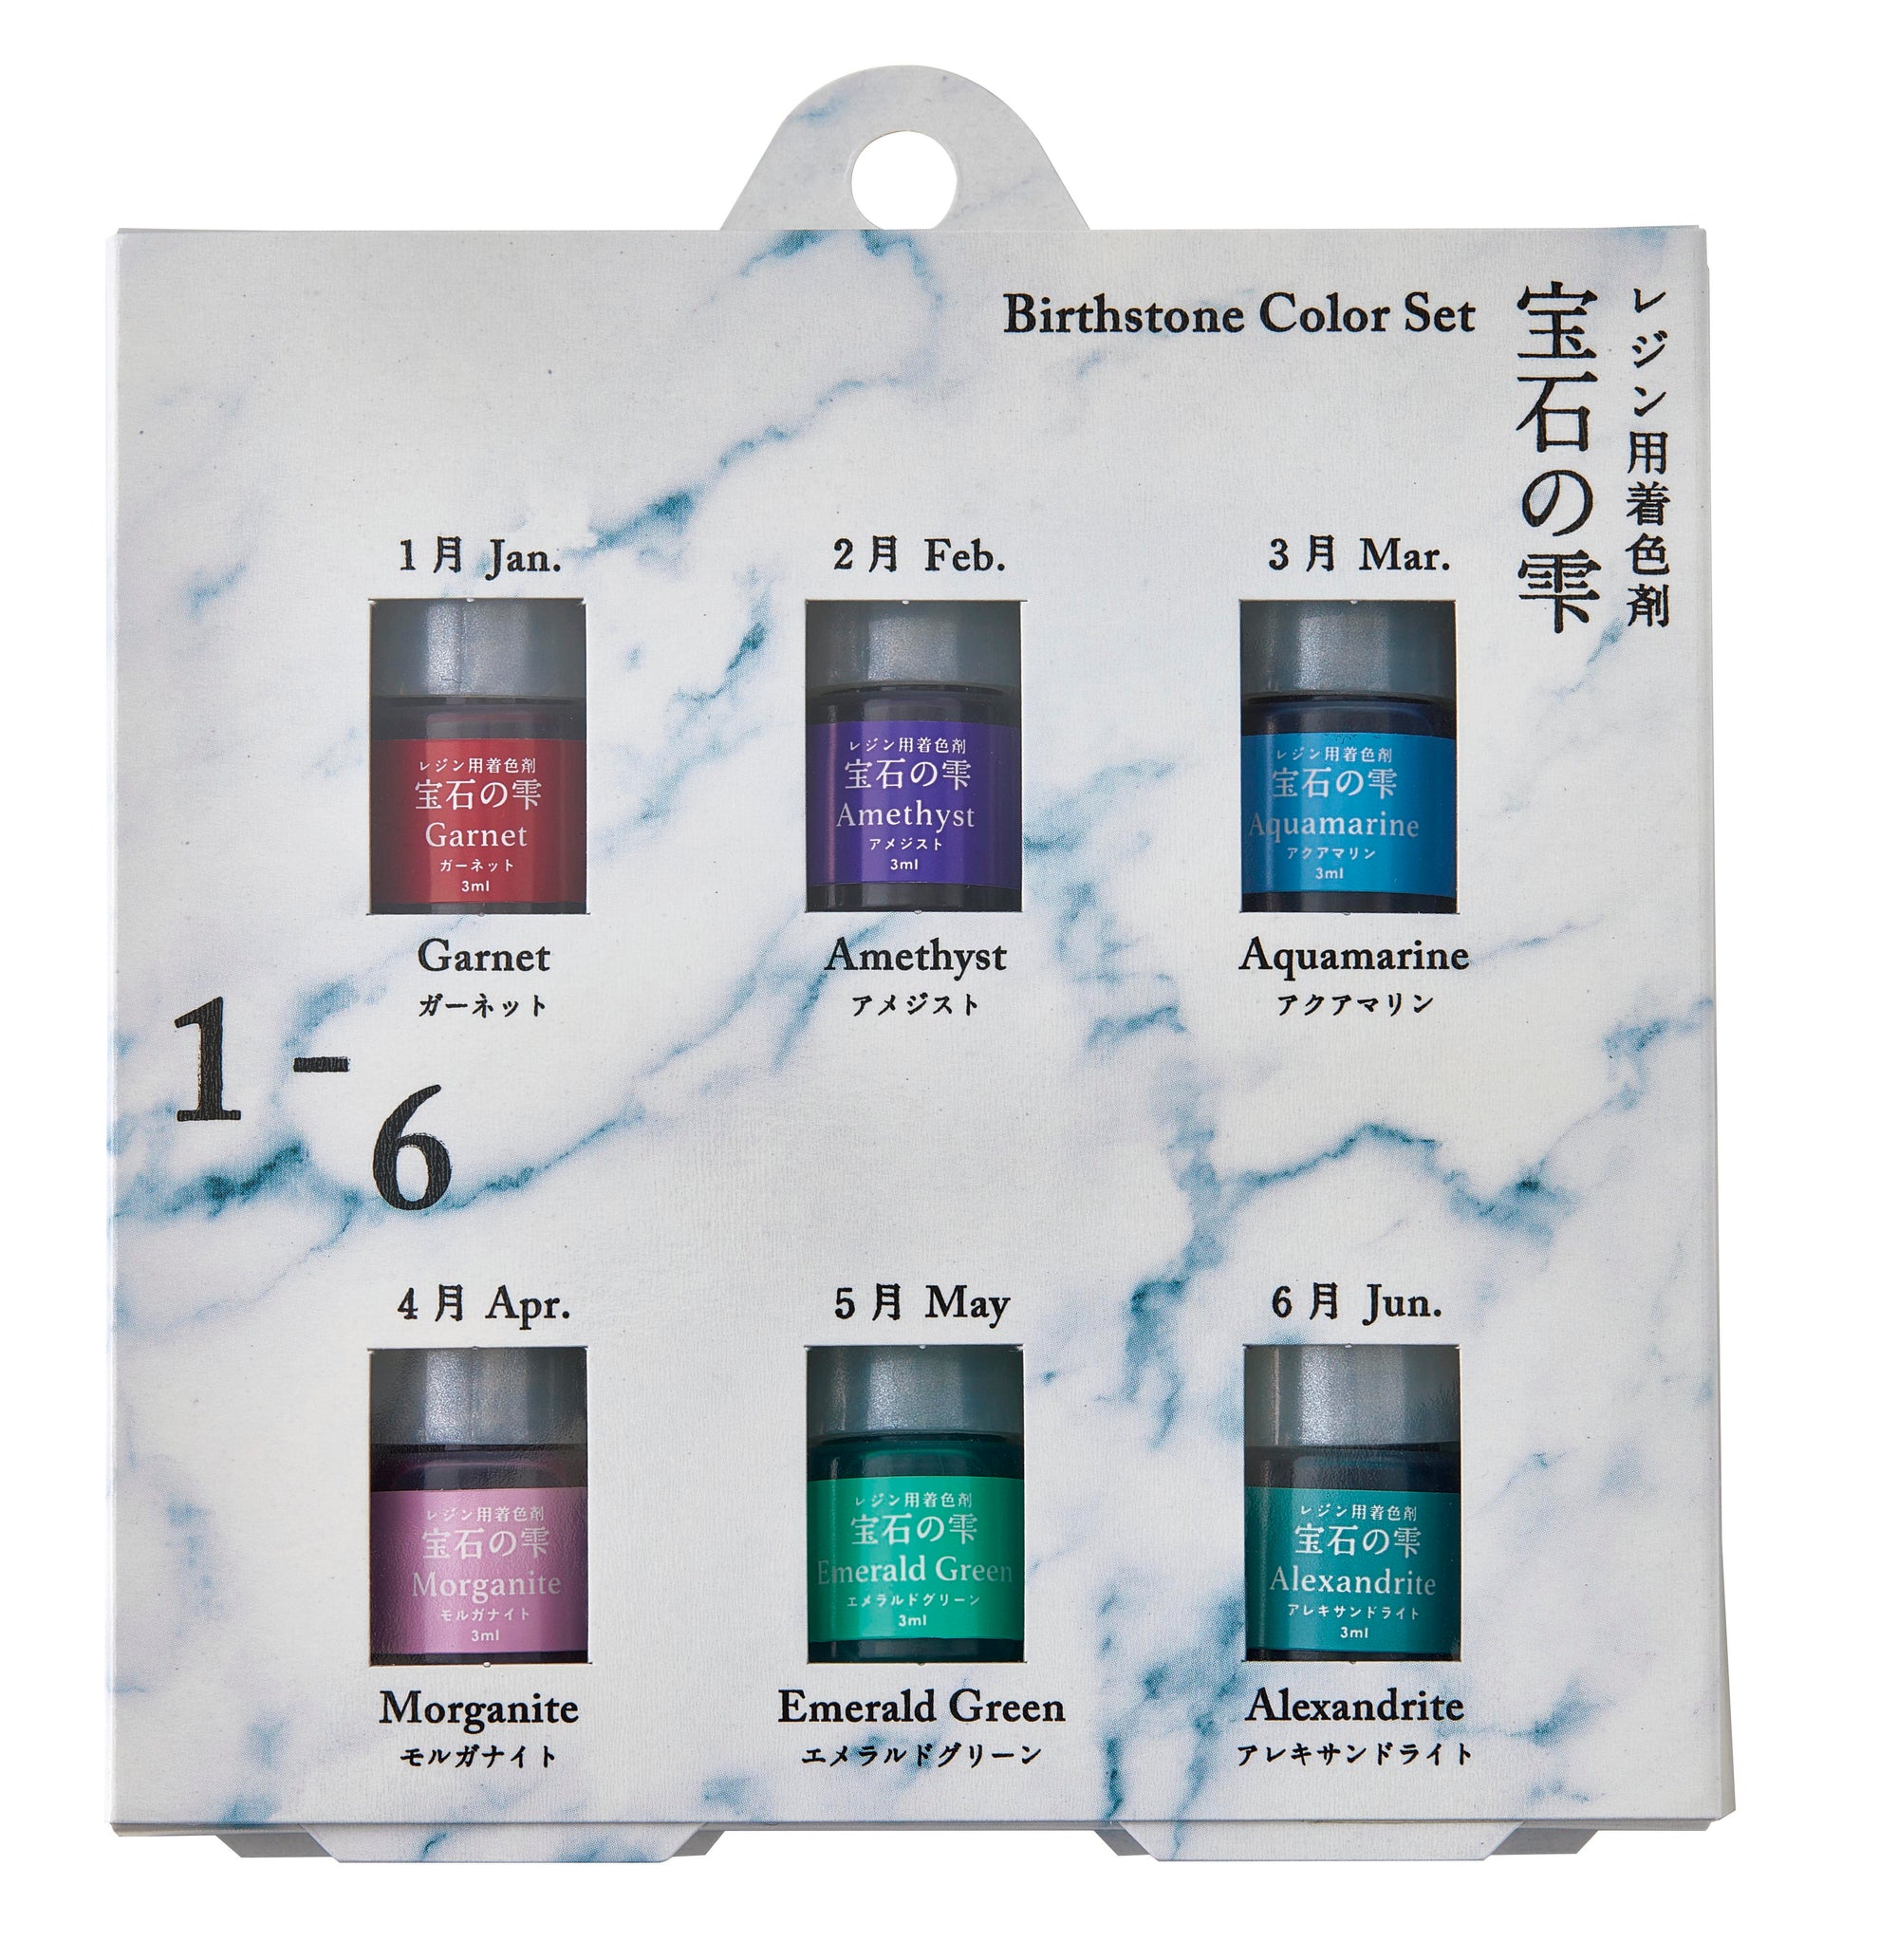 Limited Edition Padico Jewel Pigment Clear Color Set - Birthstones 1-6